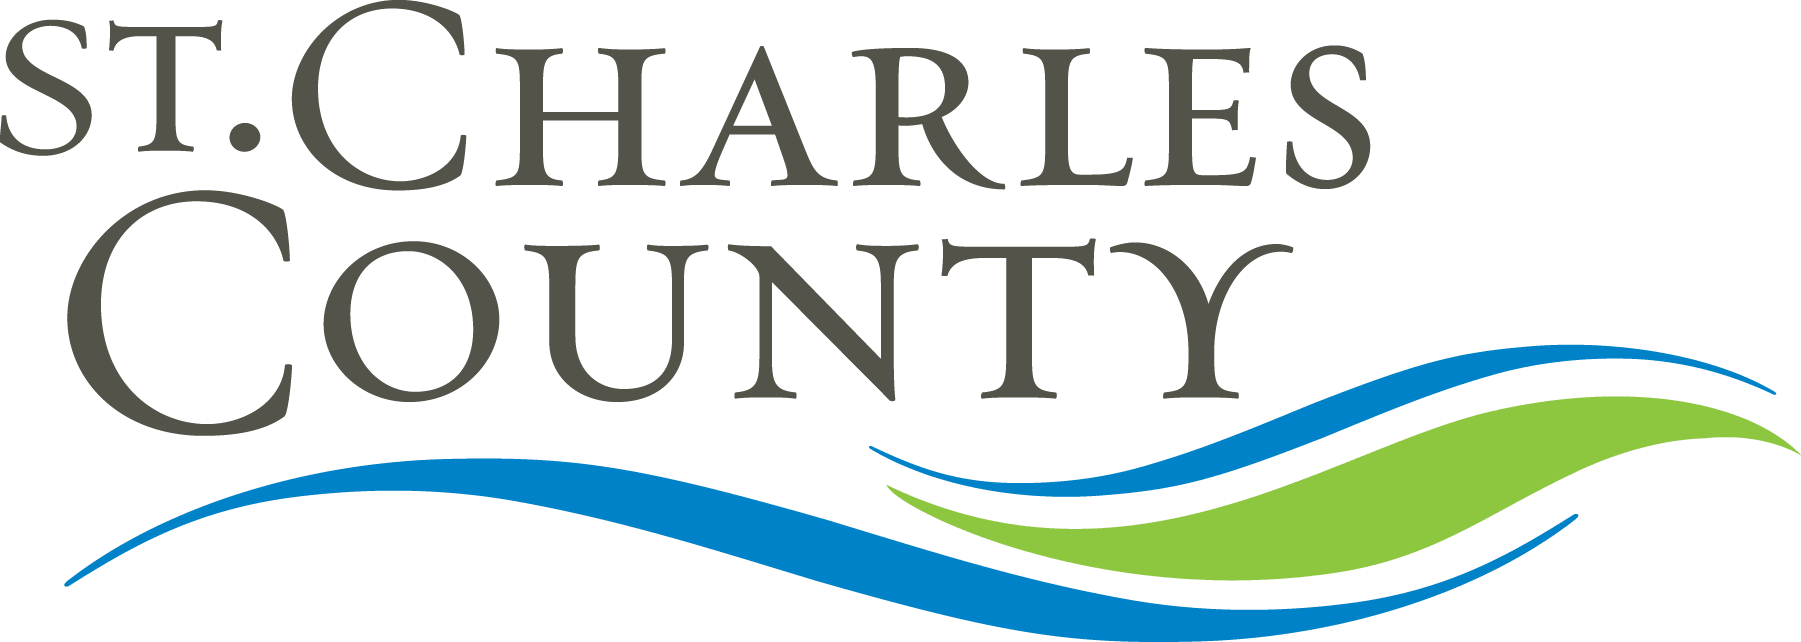 County Logo - Logo Use | St Charles County, MO - Official Website